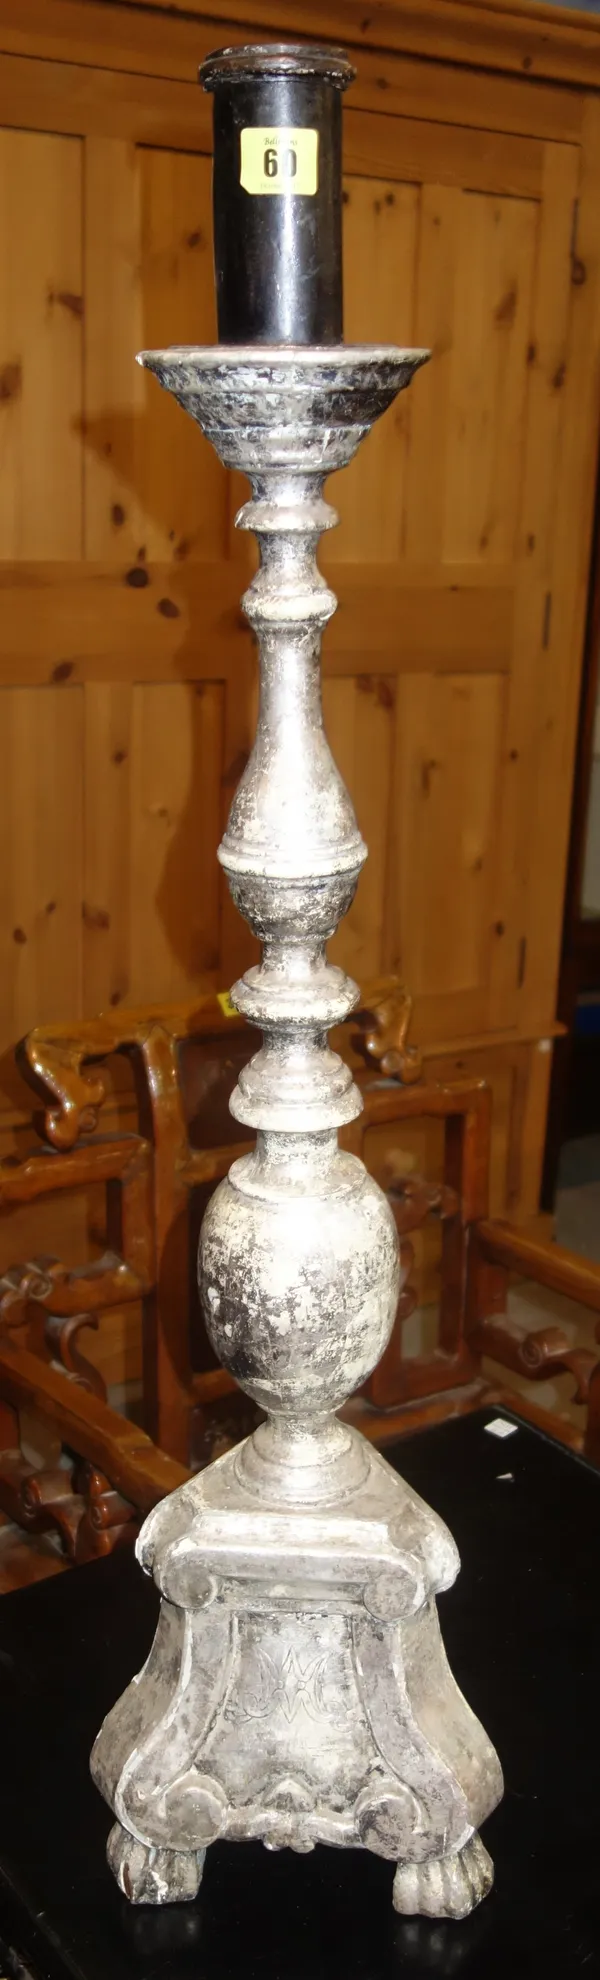 A 17th century style silvered wooden altar stick.   C10